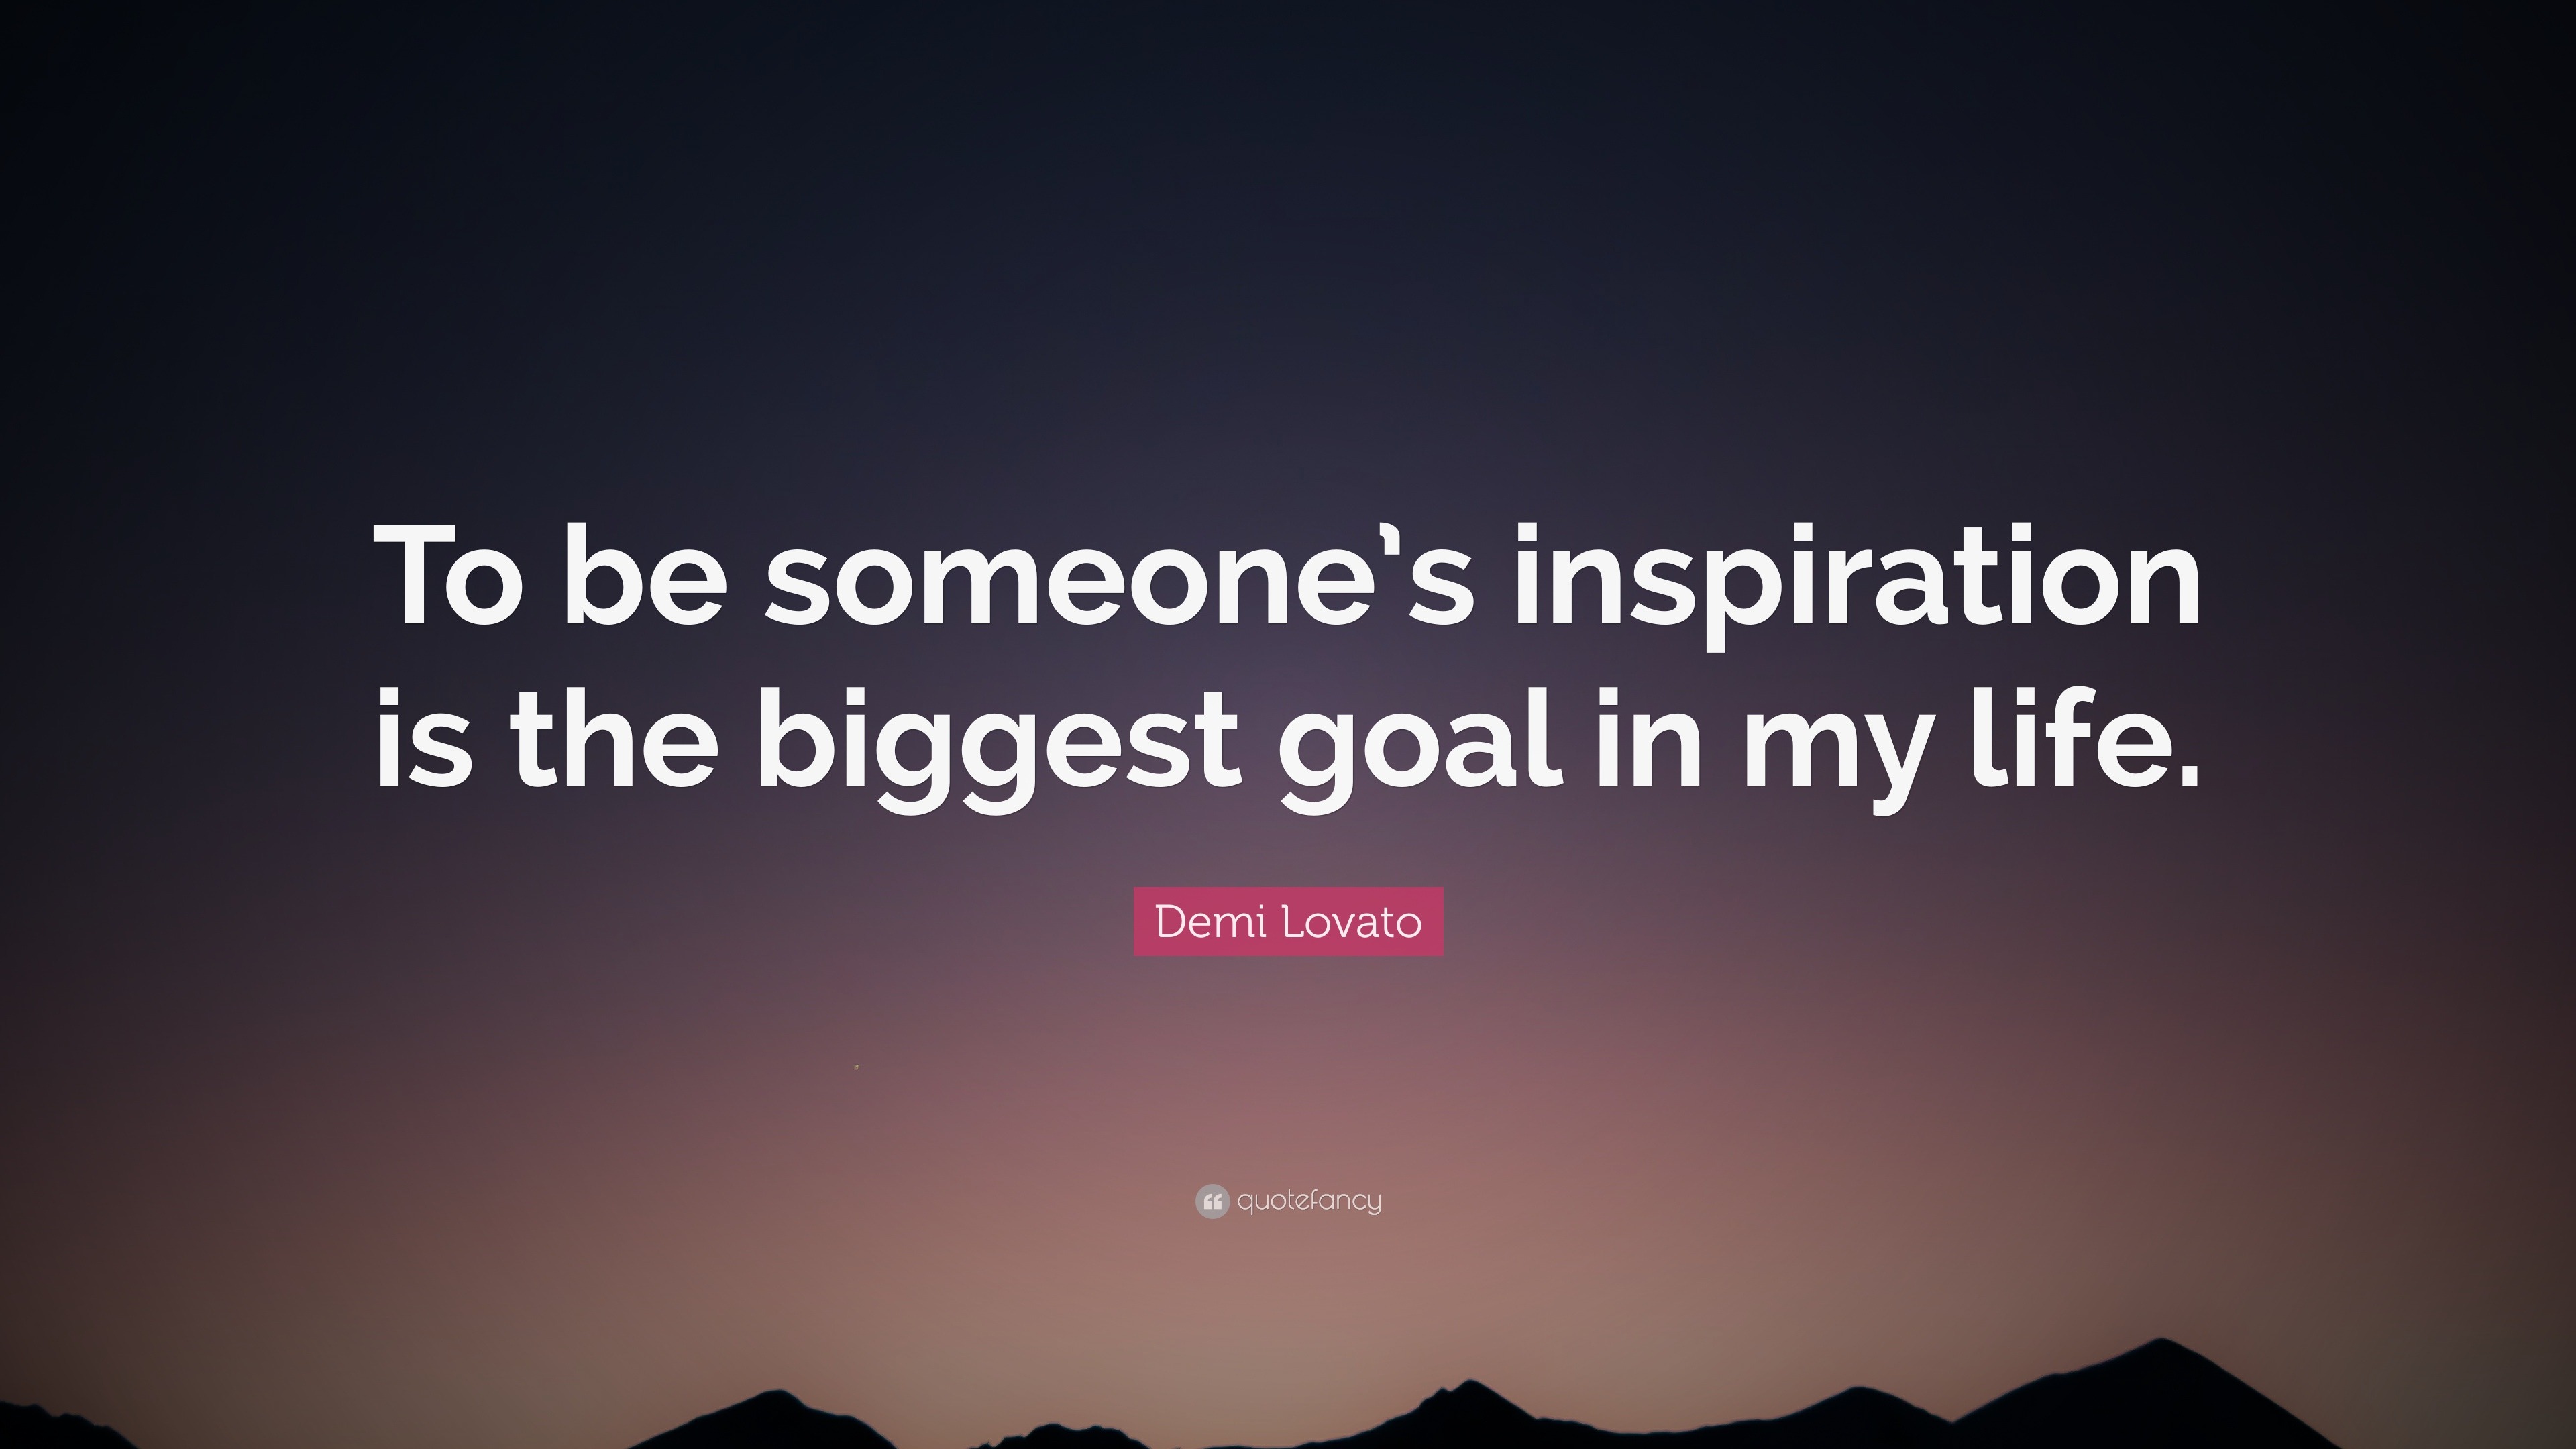 Demi Lovato Quote “To be someone s inspiration is the biggest goal in my life